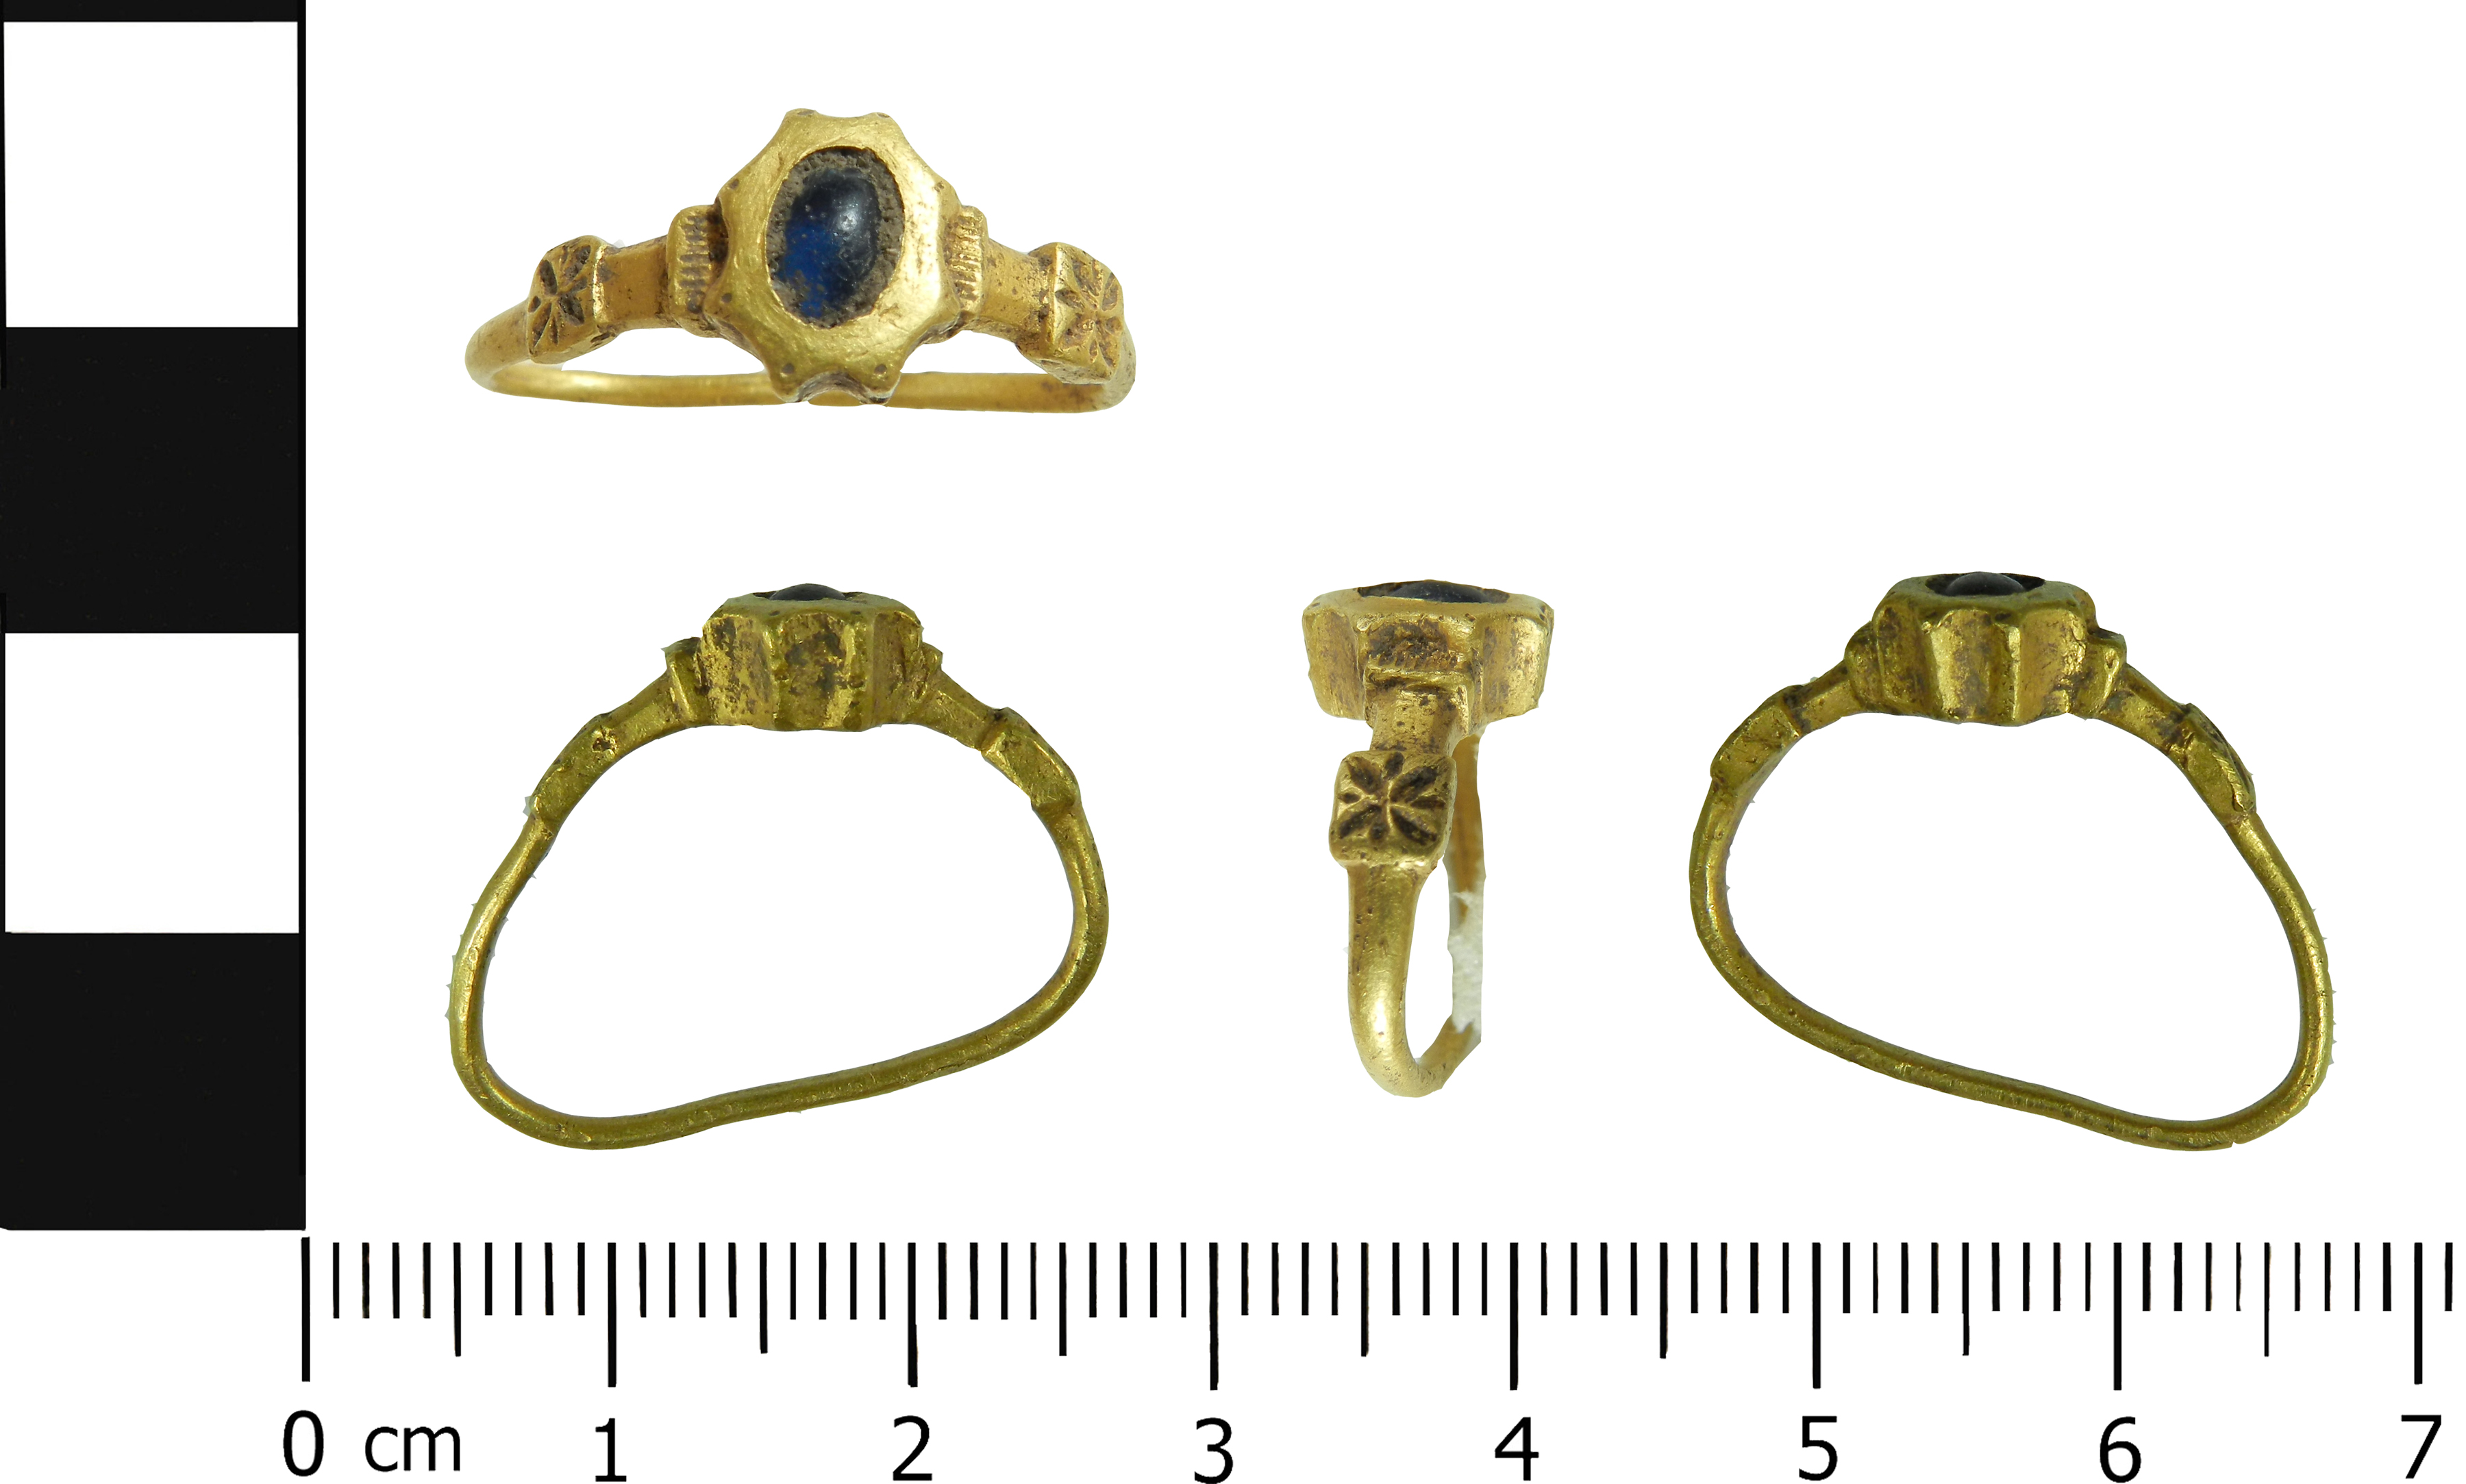 Gold and cobalt blue glass finger ring dating to the 14th century.